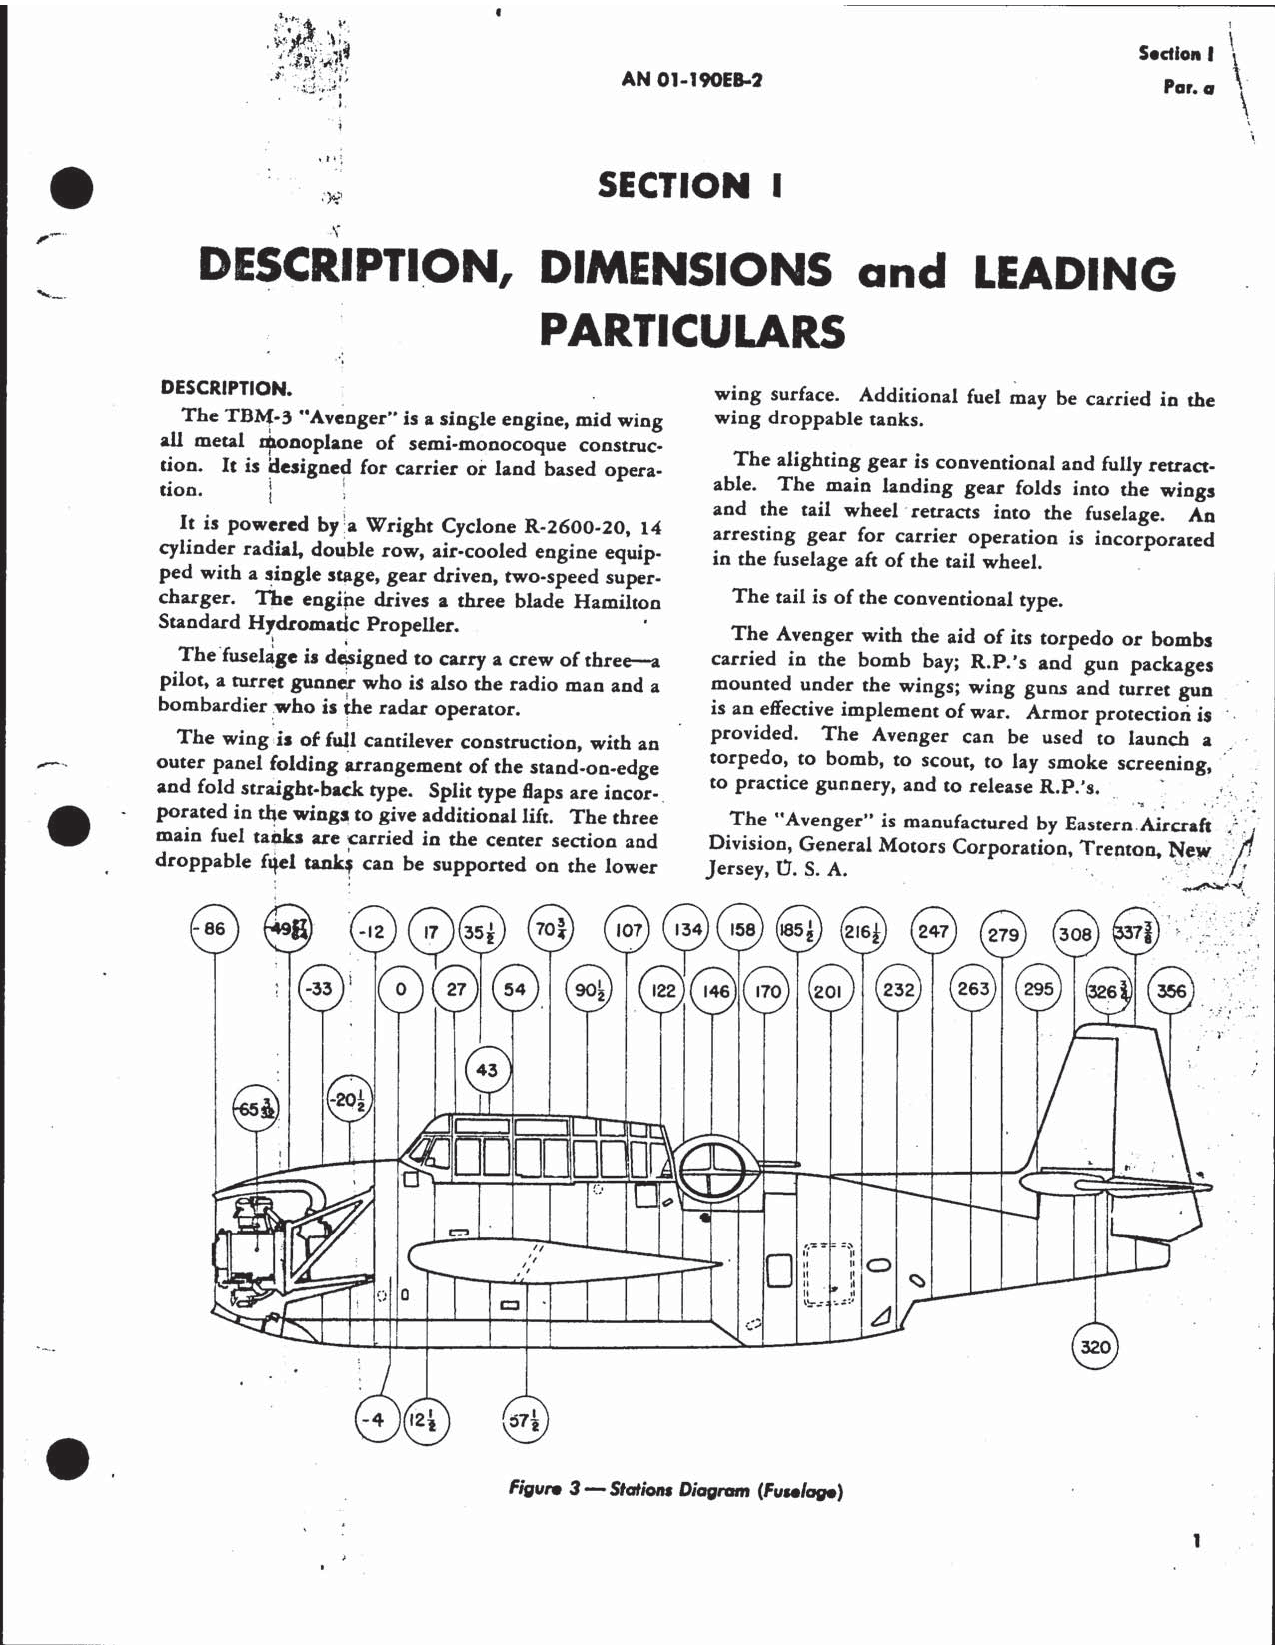 Sample page 11 from AirCorps Library document: Erection and Maintenance Handbook TBM-3